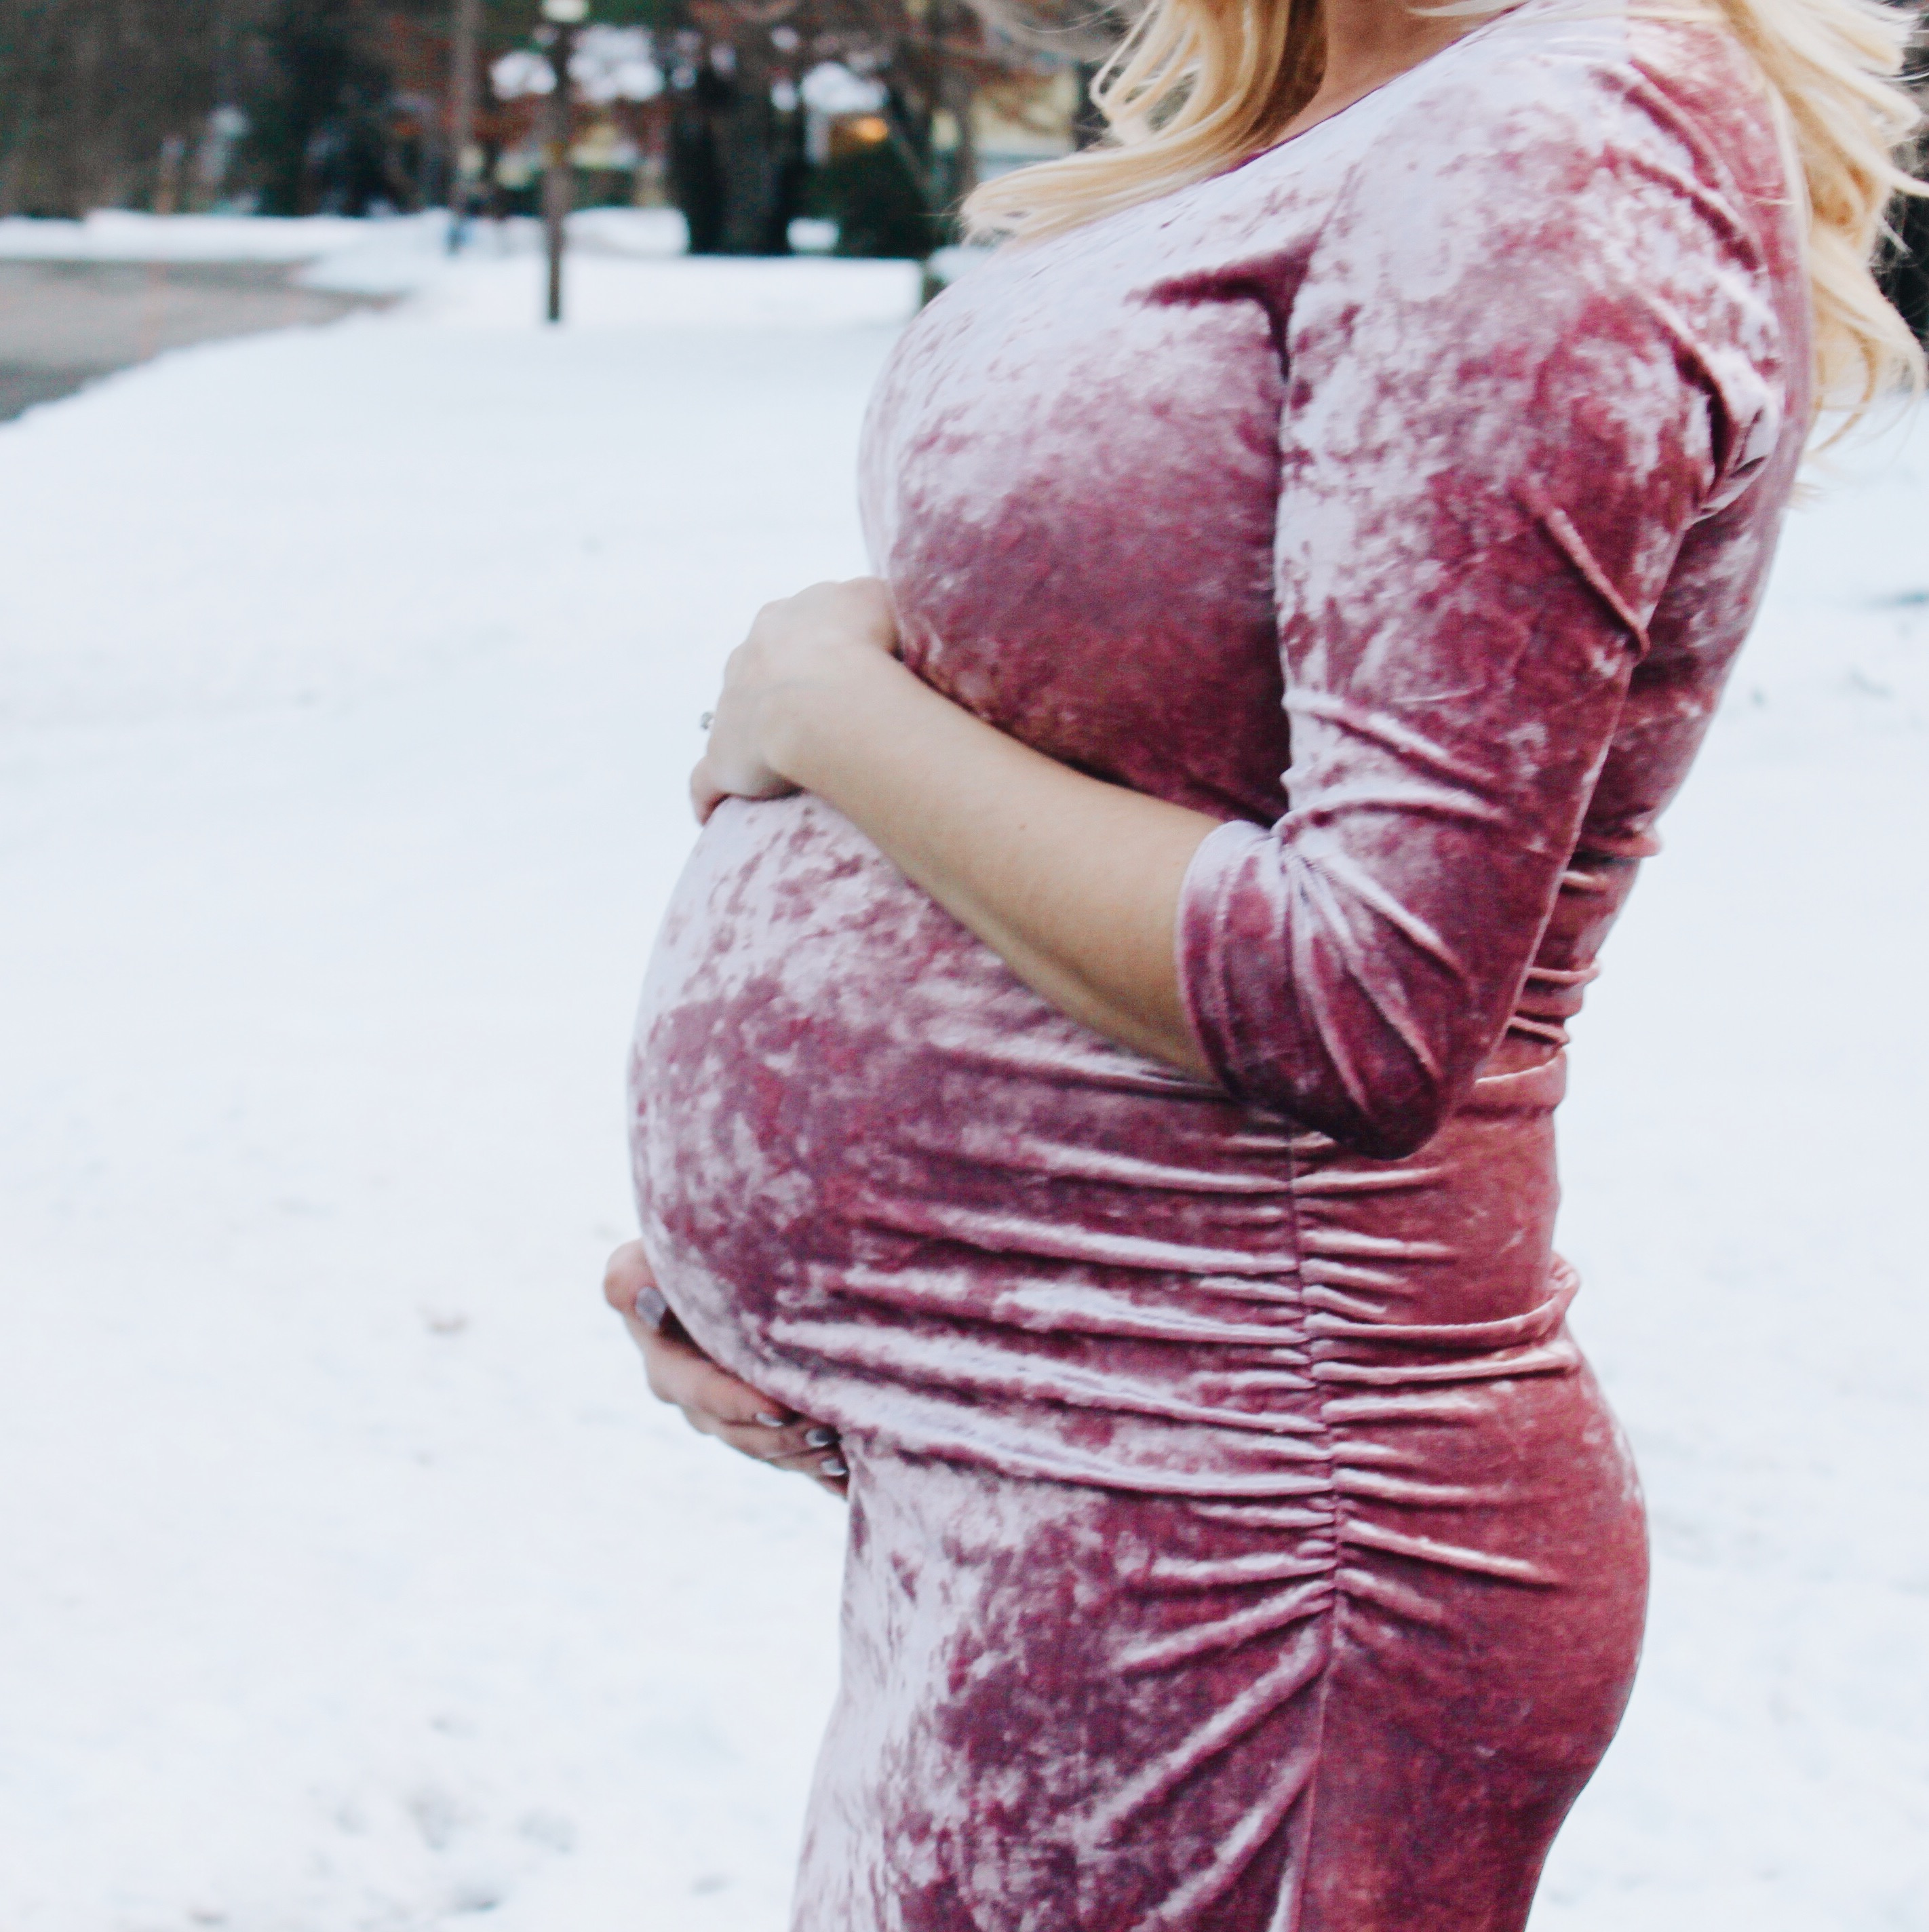 Pink crushed velvet ruched maternity dress from Pink Blush review via Market Street Petite blog